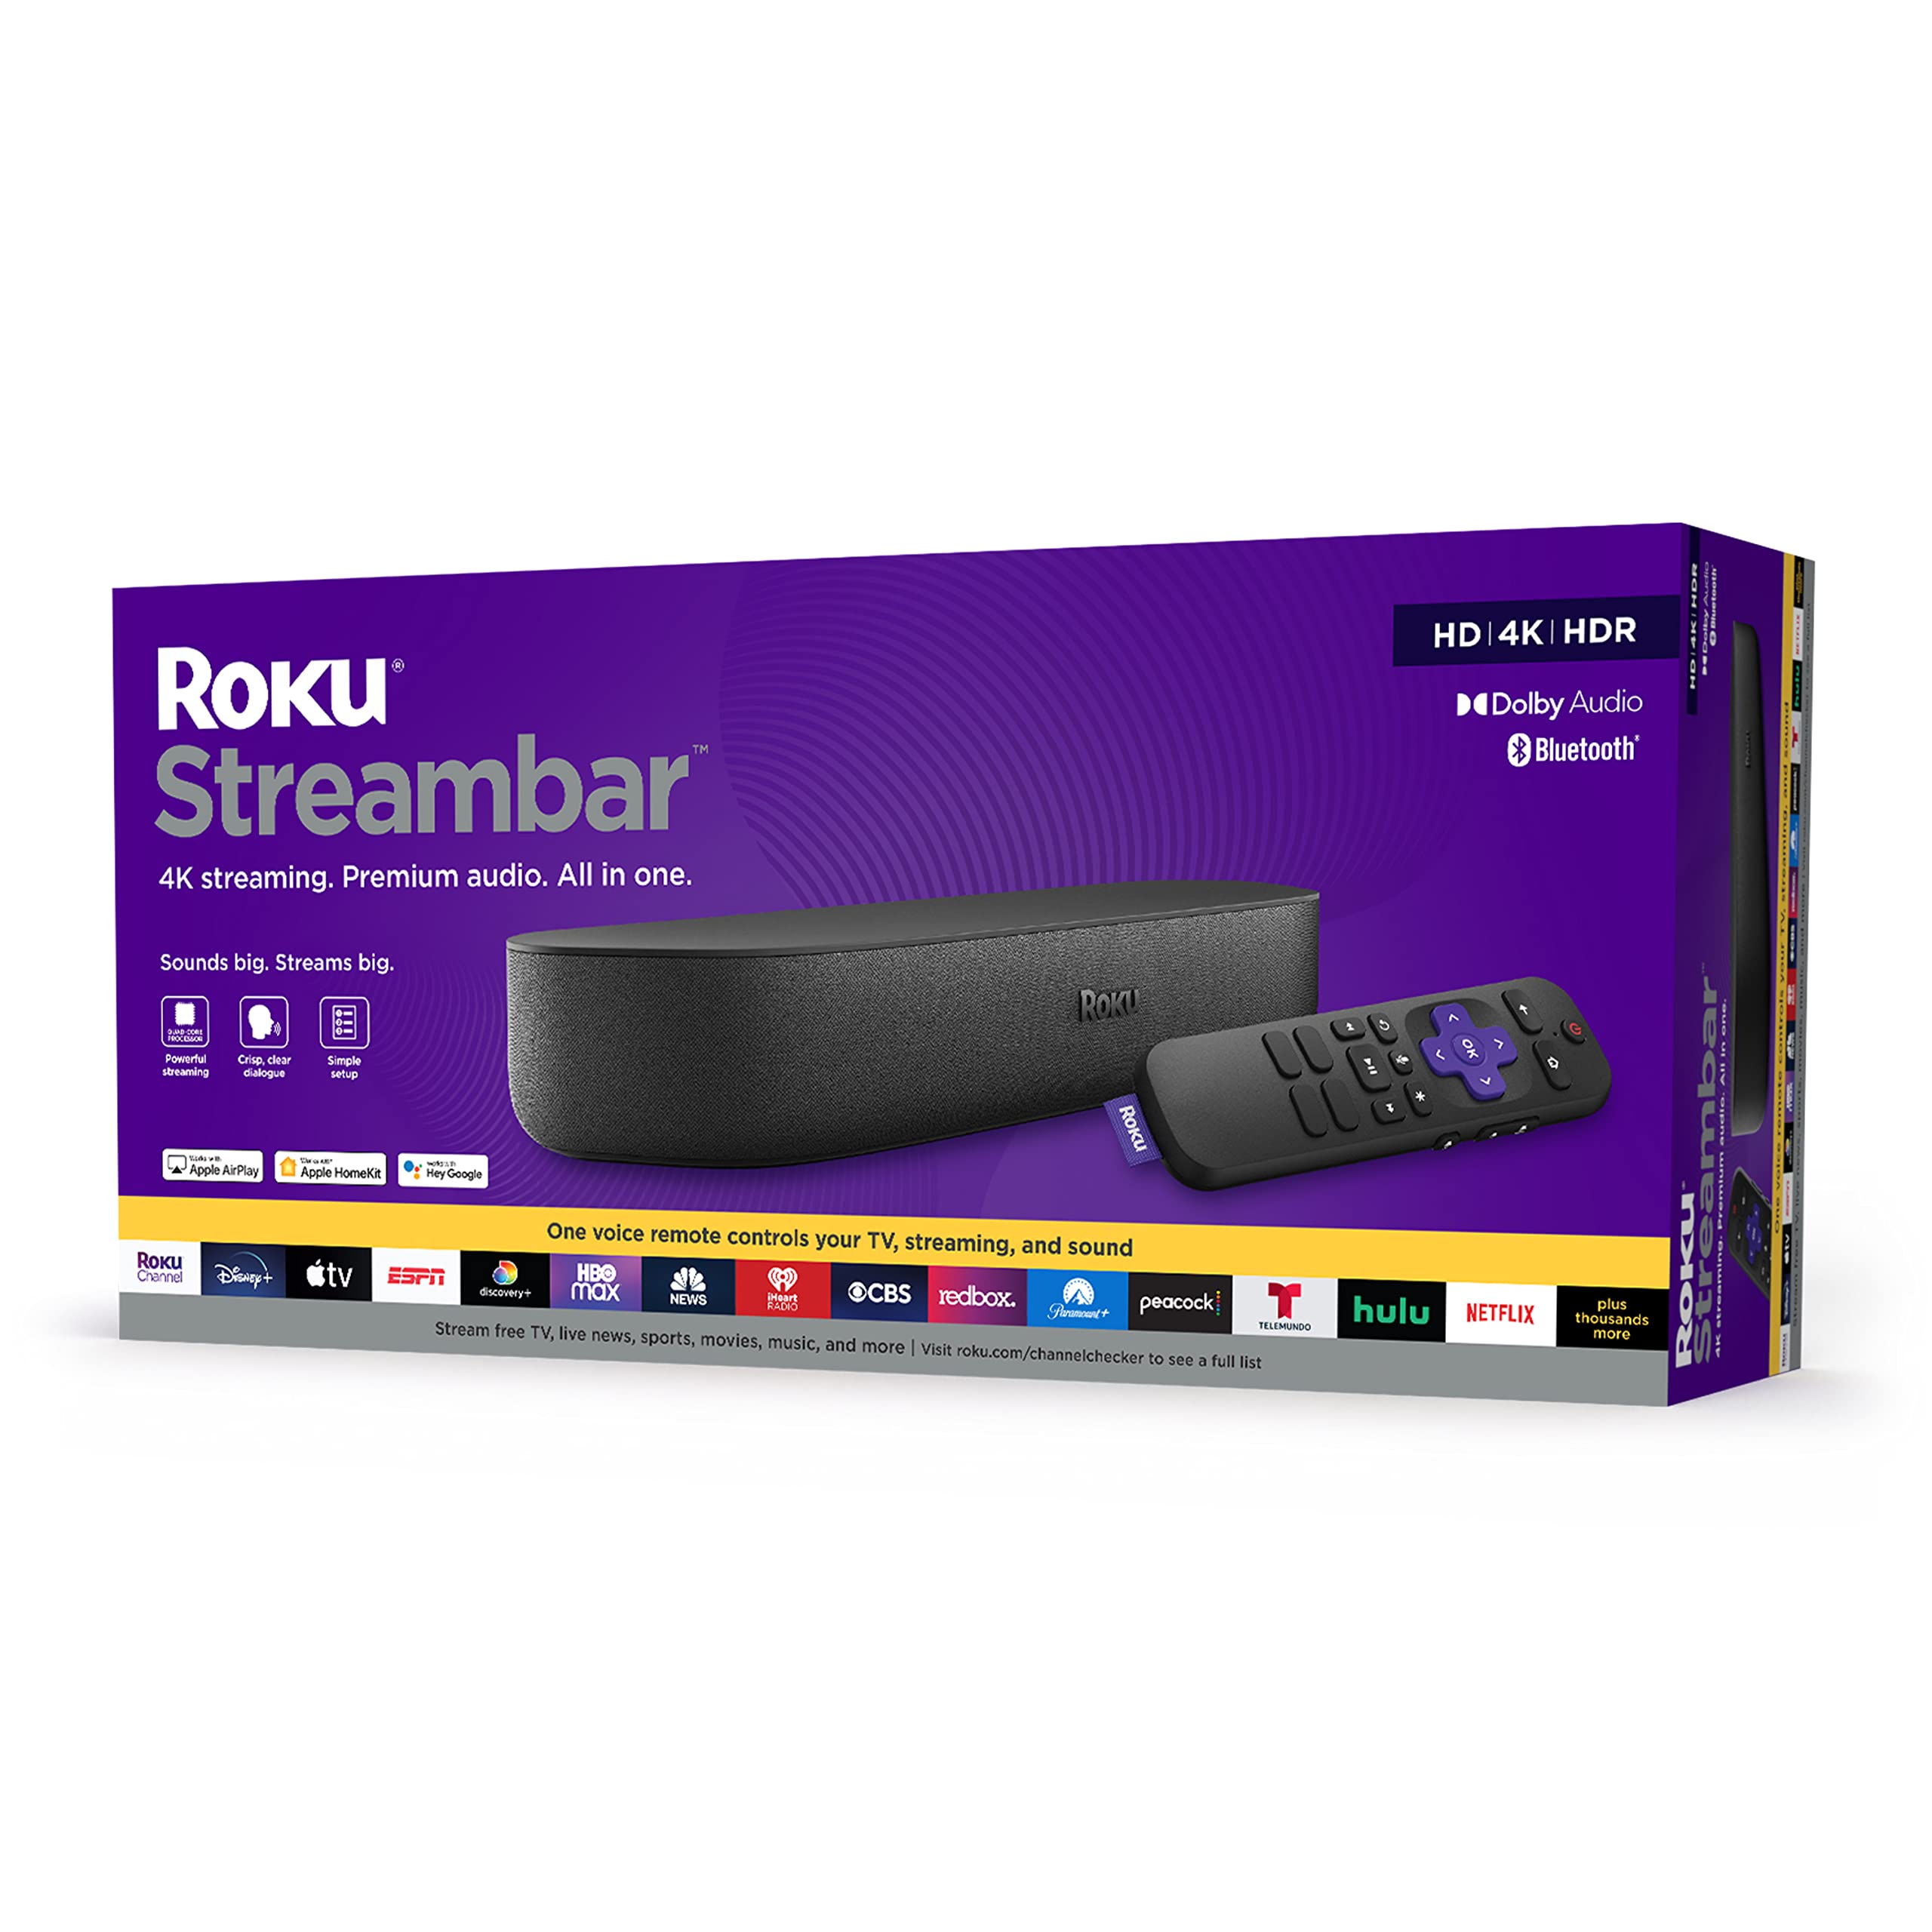 new roku streambar arrives on fcc, hints upcoming launch